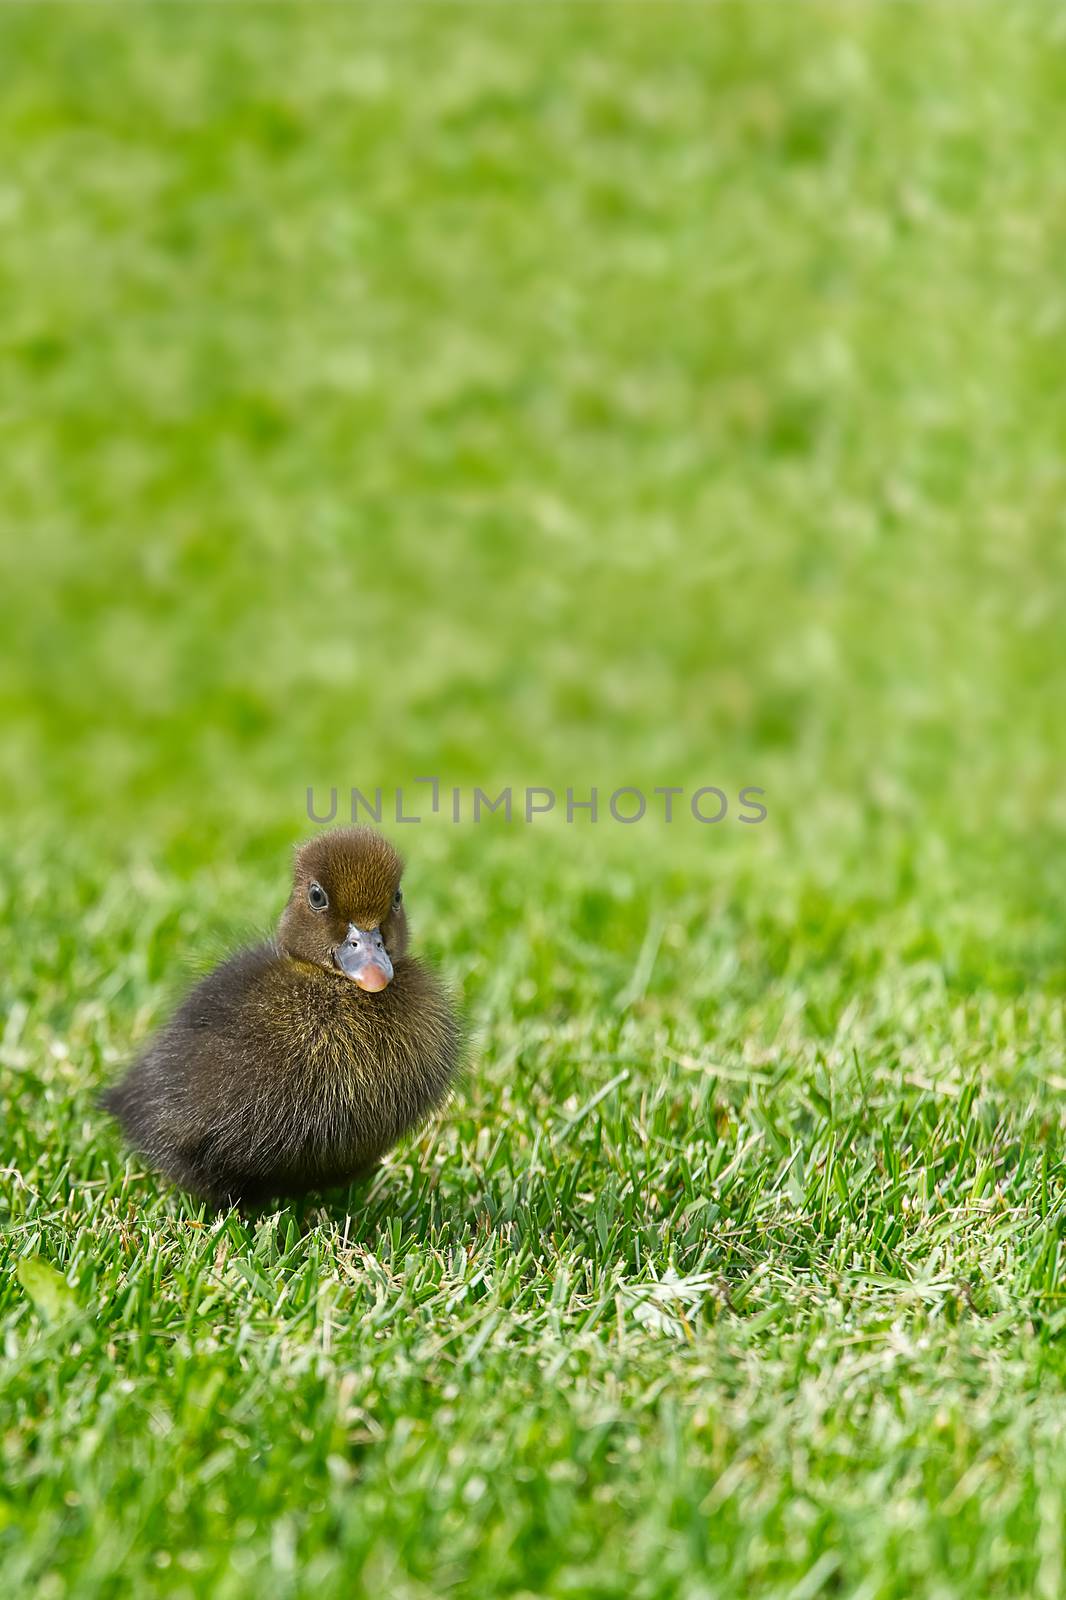 Small newborn ducklings walking on backyard on green grass. Brown cute duckling running on meadow field in sunny day. Banner or panoramic shot with duck chick on grass